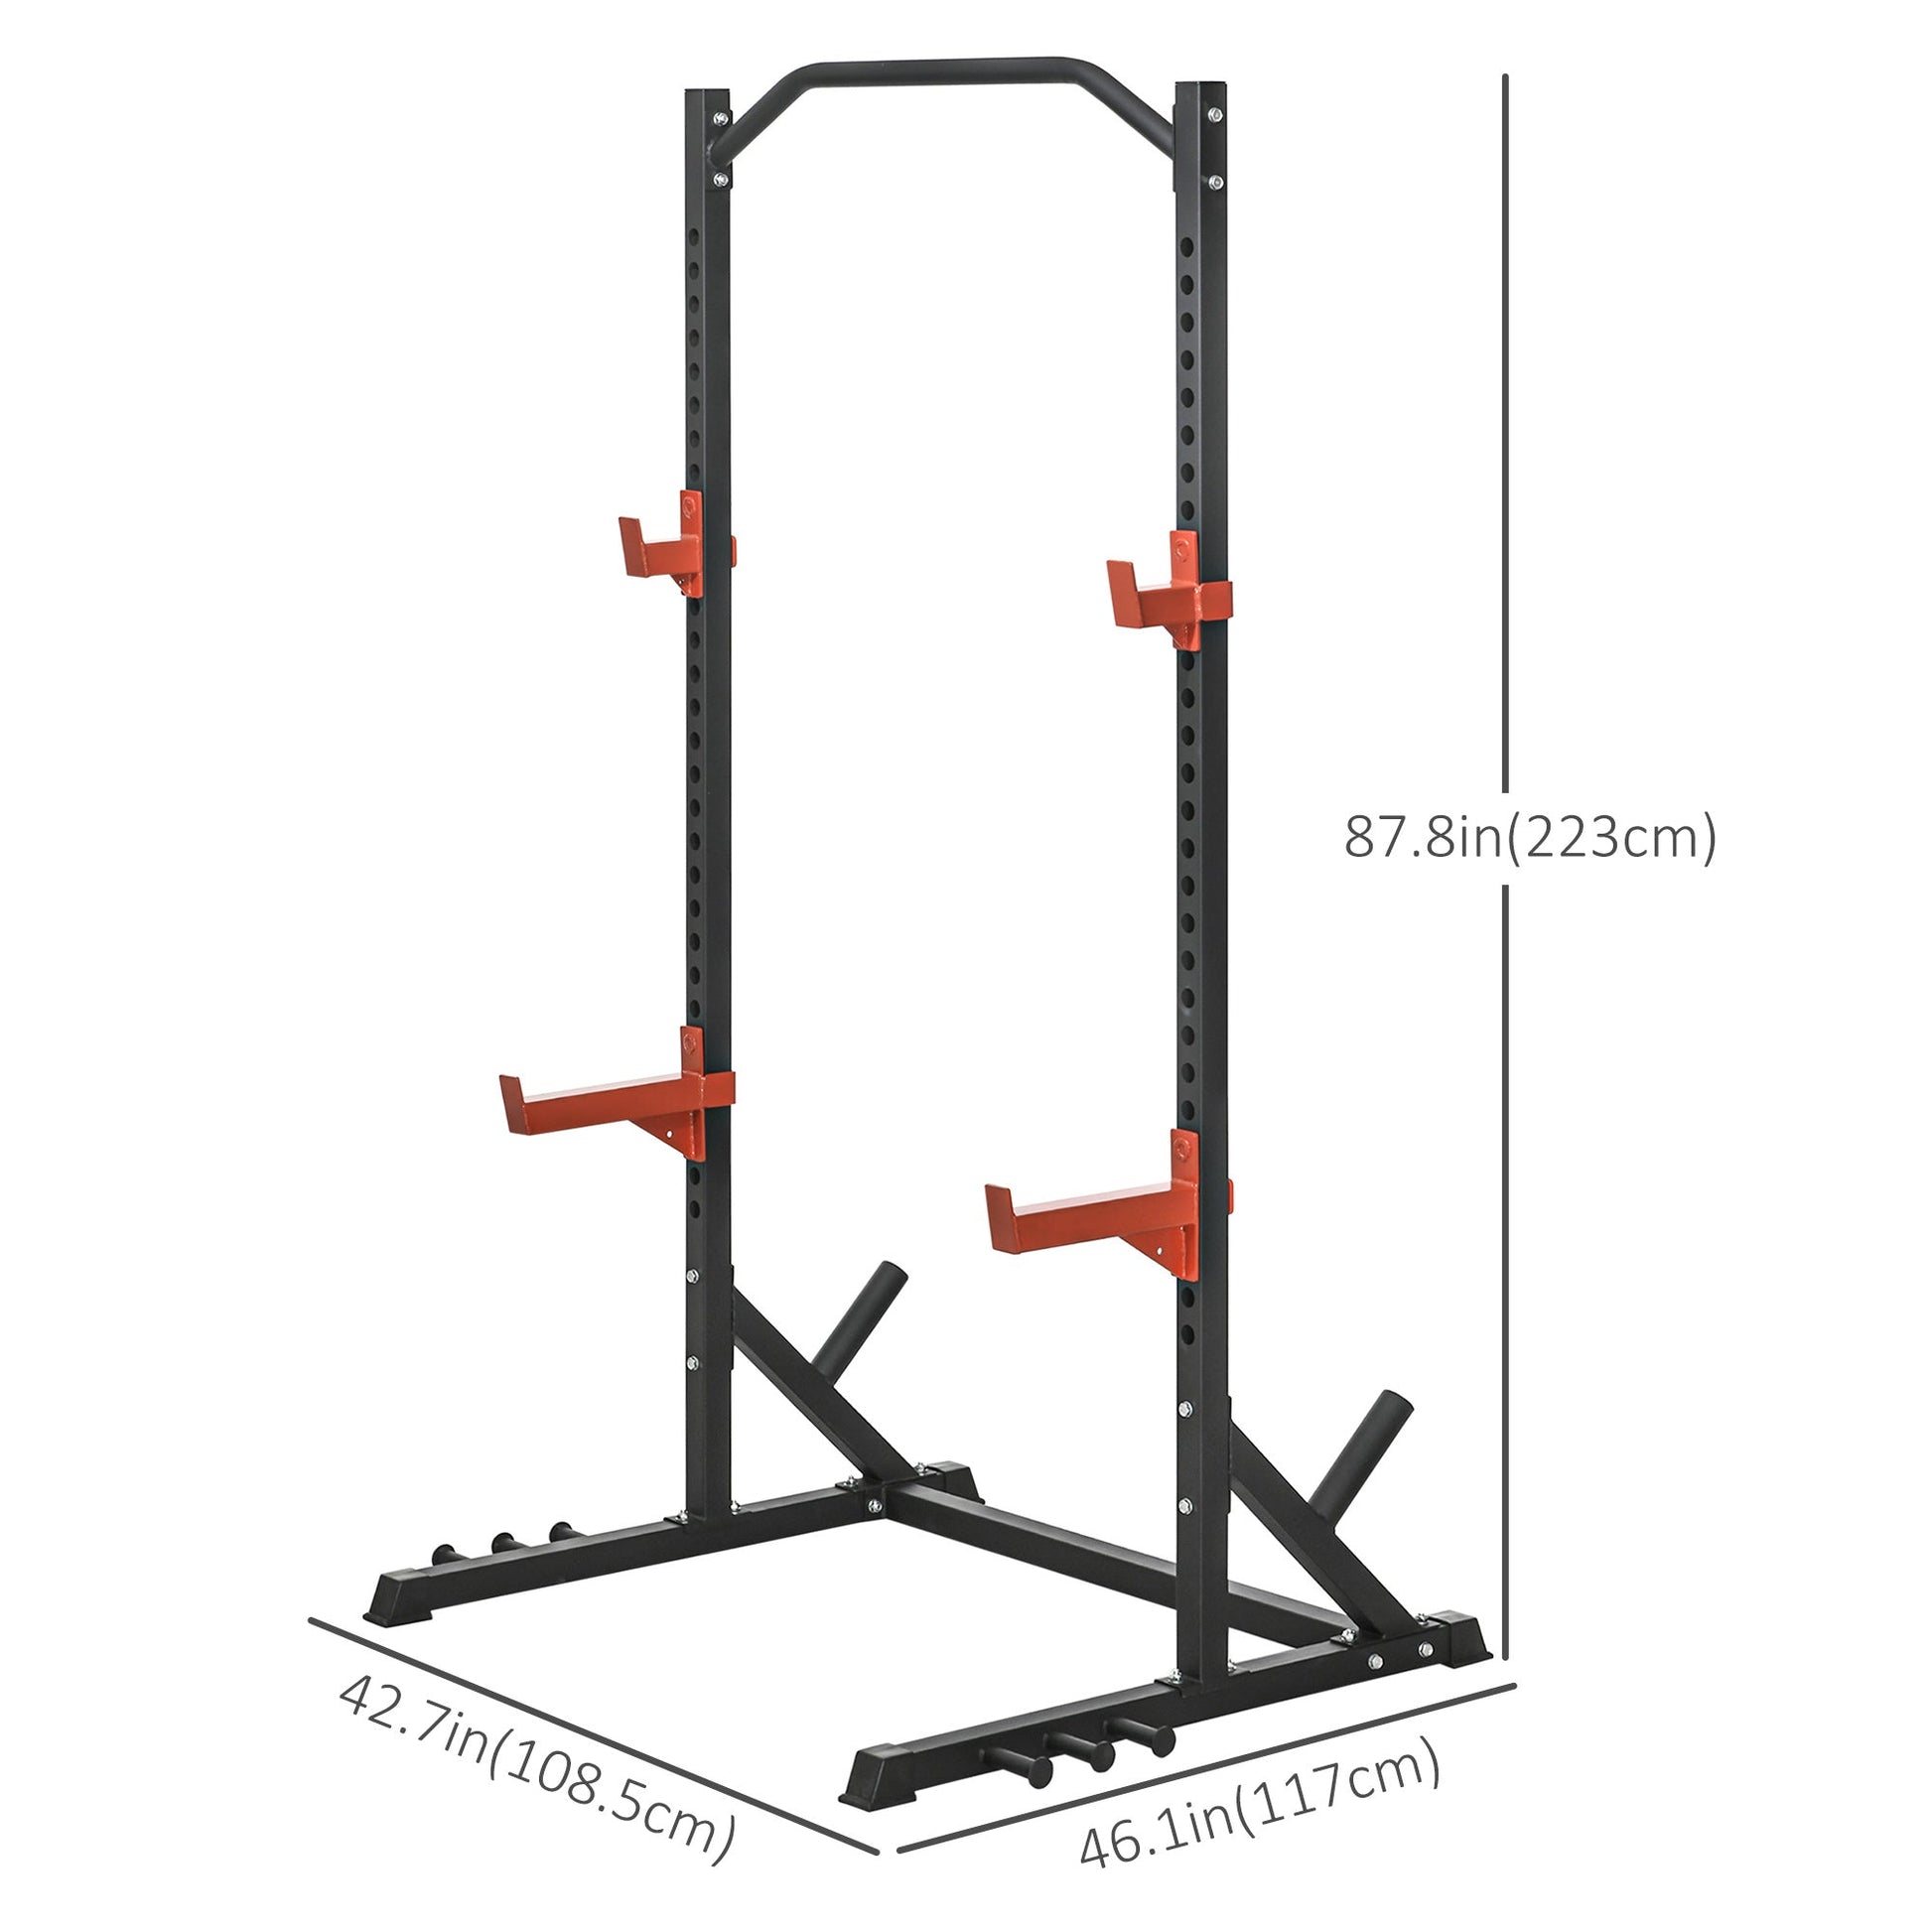 Multifunction Power Rack, Adjustable Squat Rack Stand with Pull Up Bar and Weight Plate Rack, Barbell Rack for Home Gym Weight Lifting at Gallery Canada